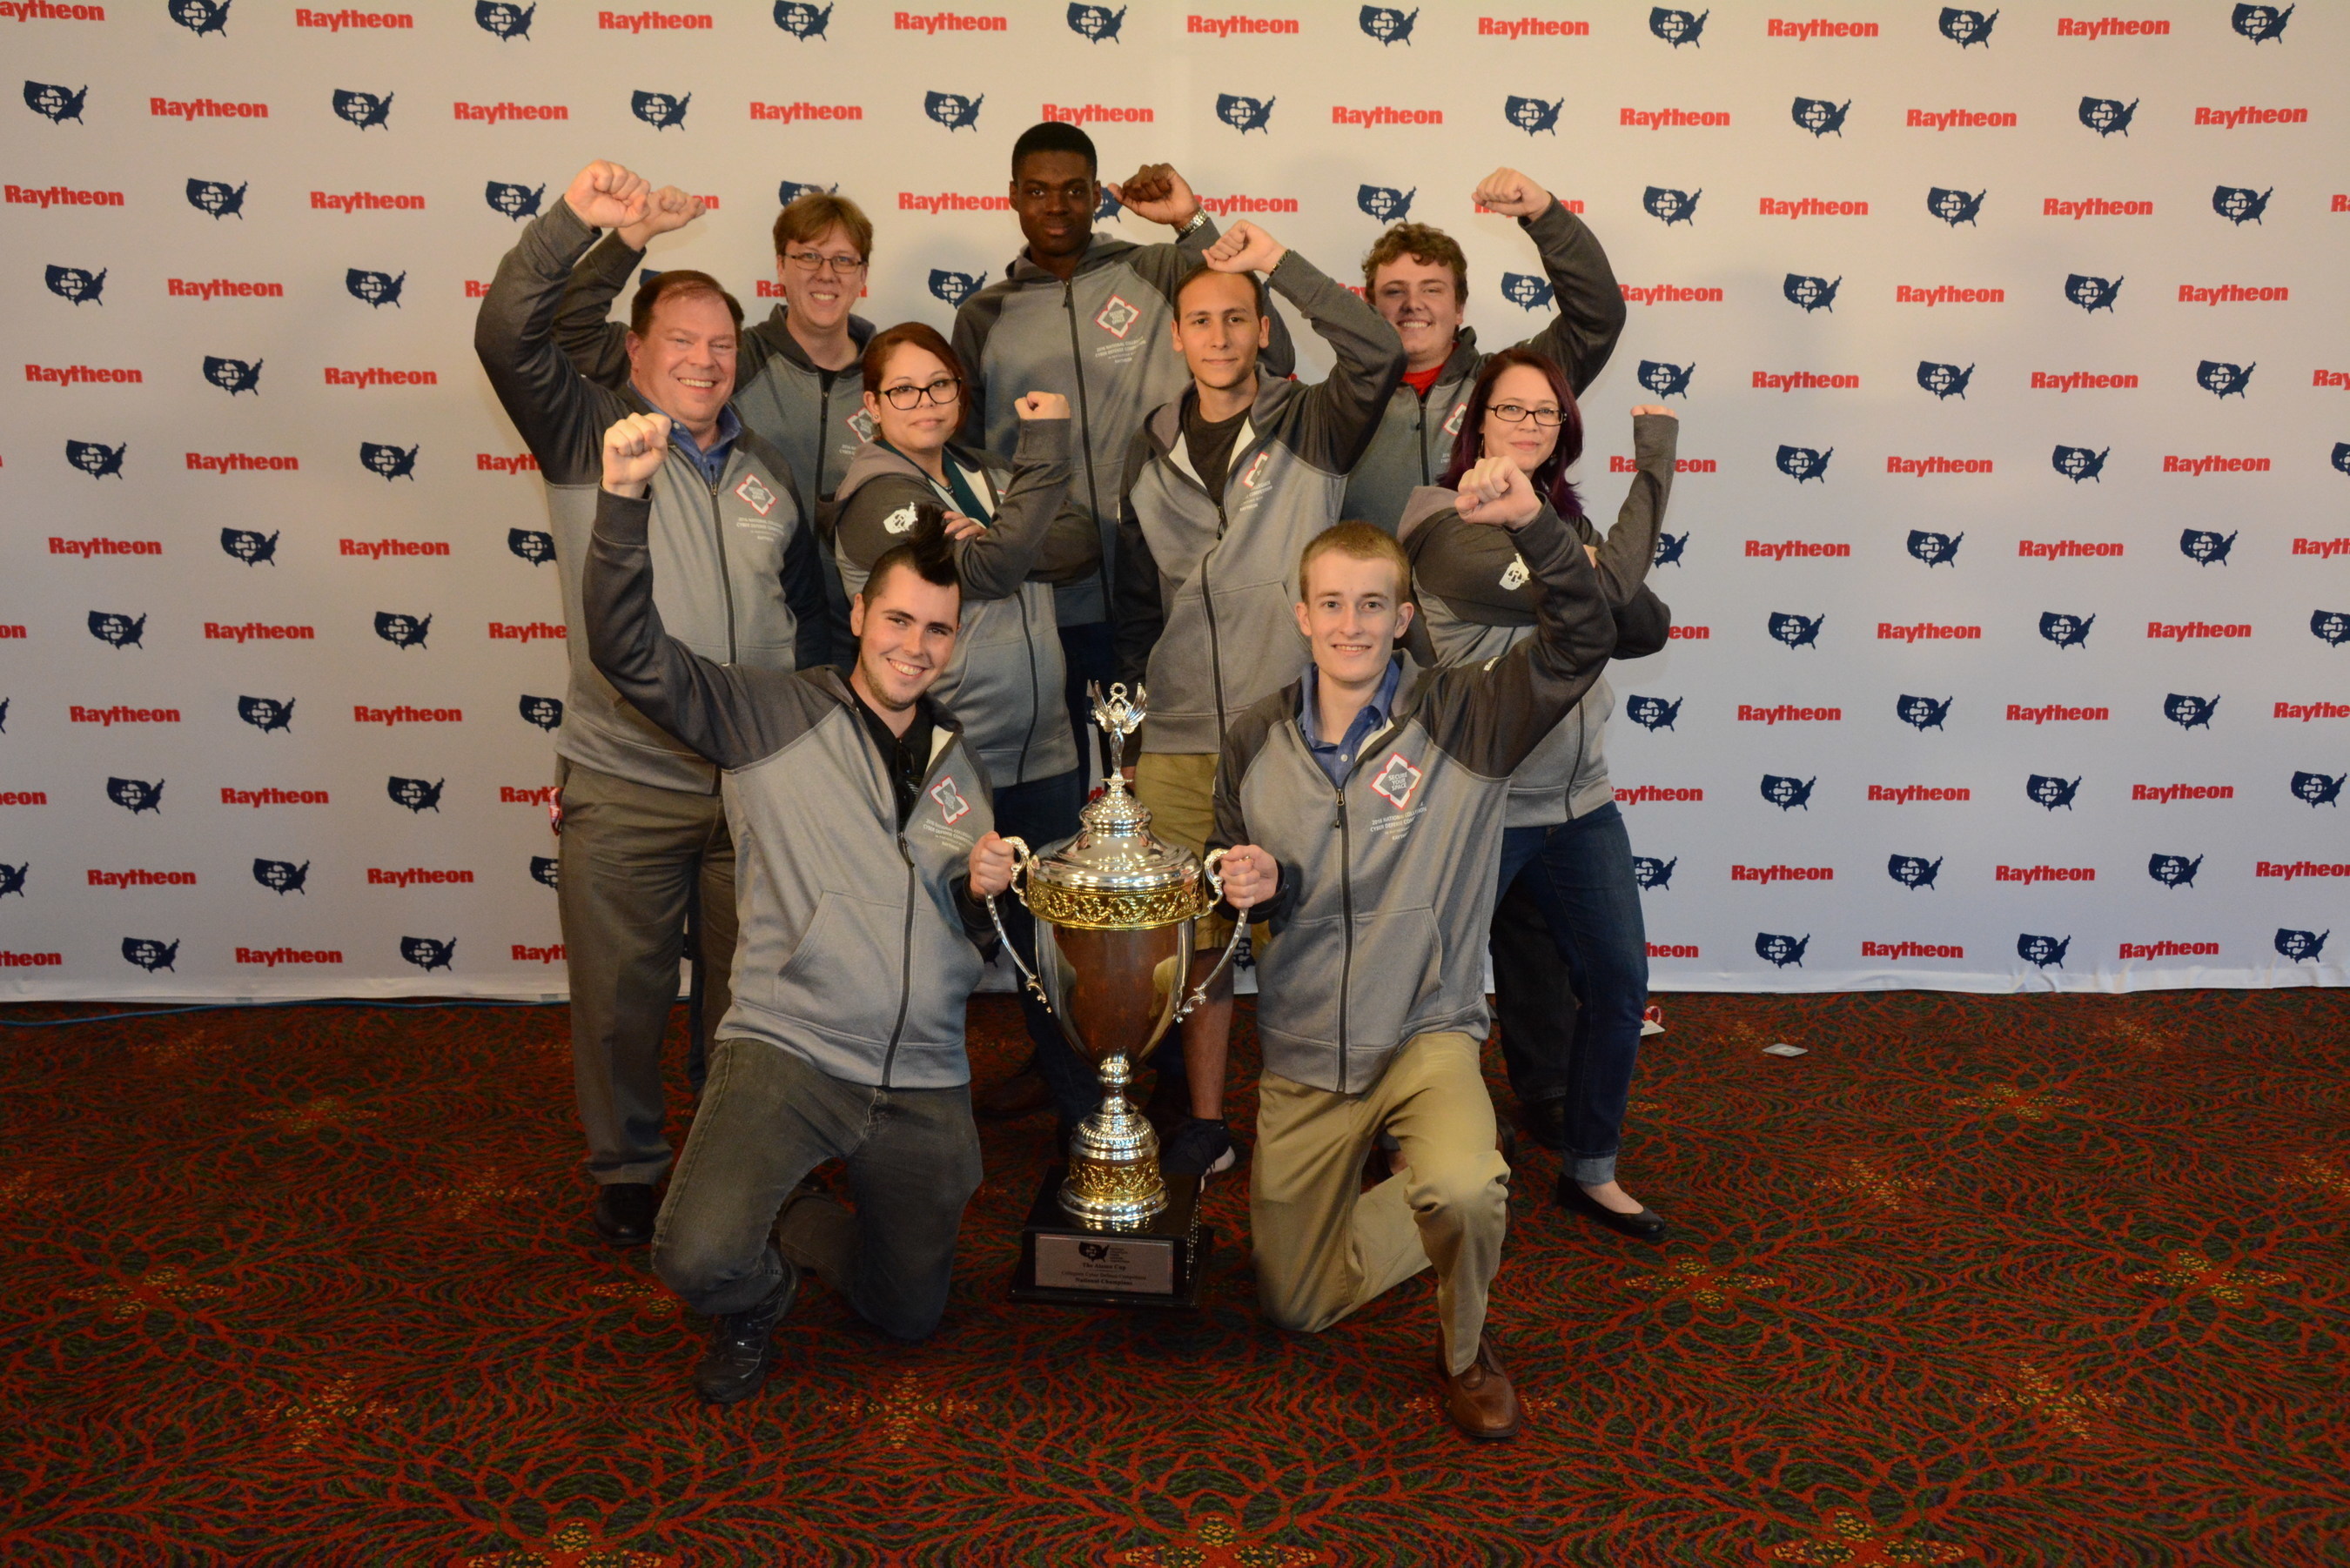 Three-peat: The University of Central Florida wins their third consecutive National Collegiate Cyber Defense Competition Championship.